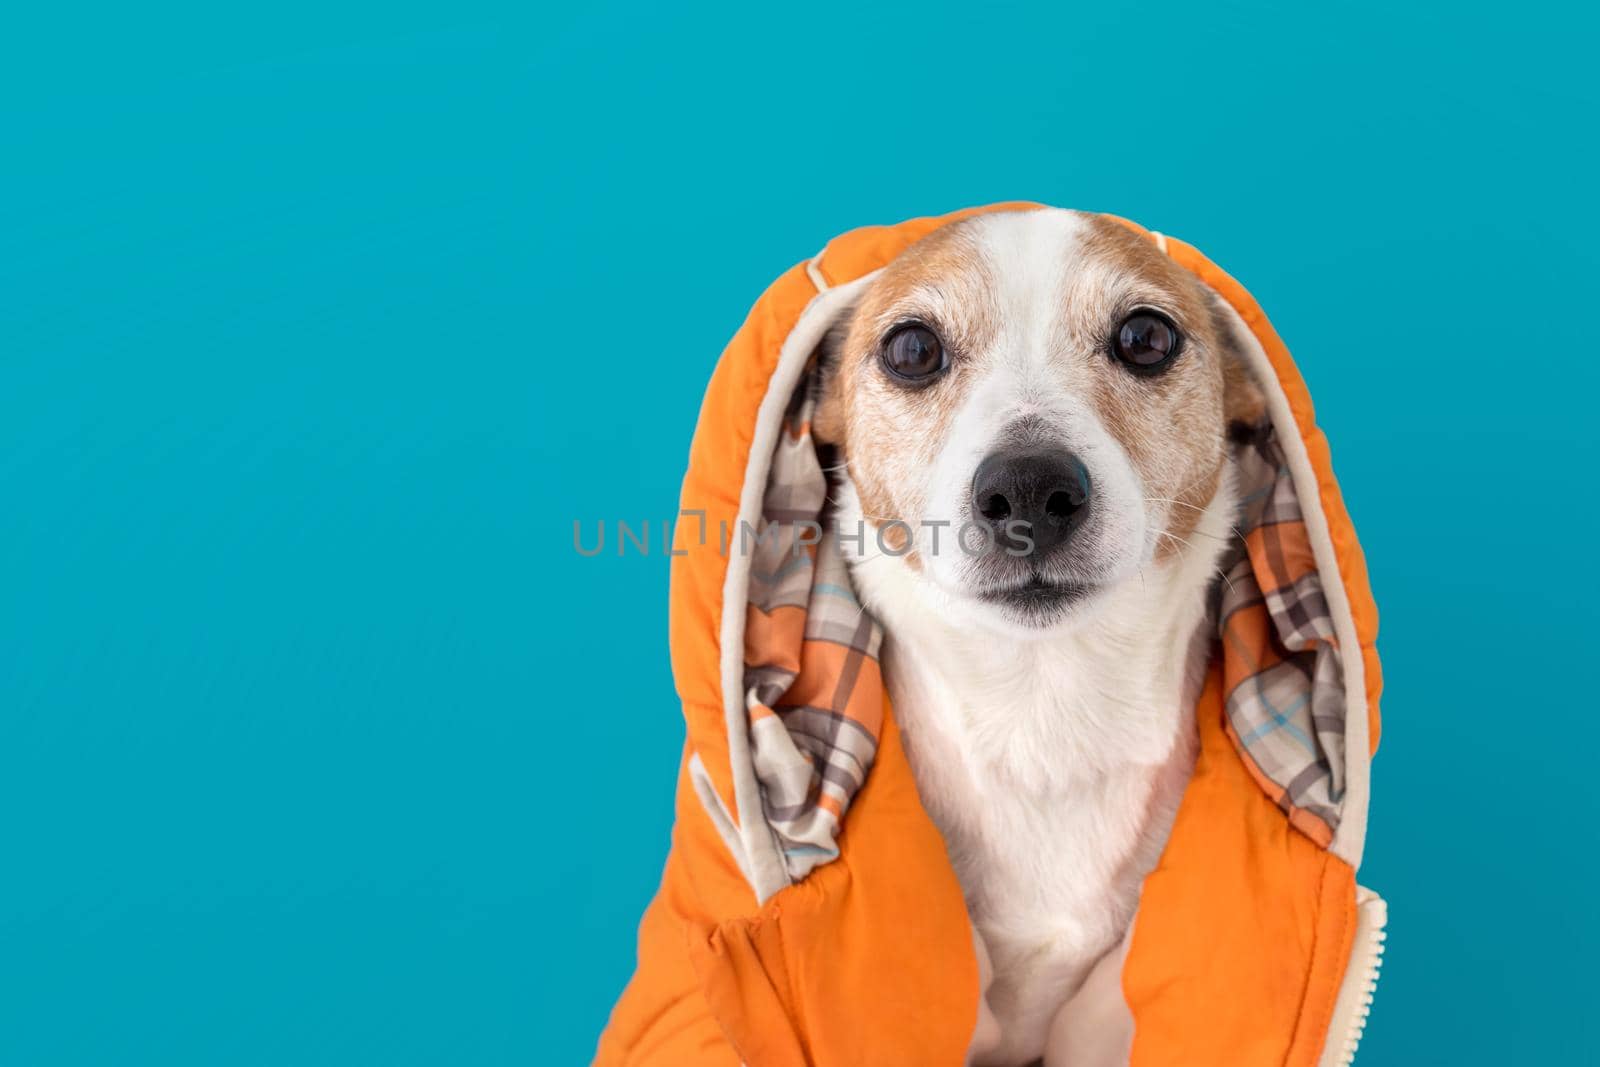 Funny little dog wearing bright orange costume with hood looking at camera sitting against blue background